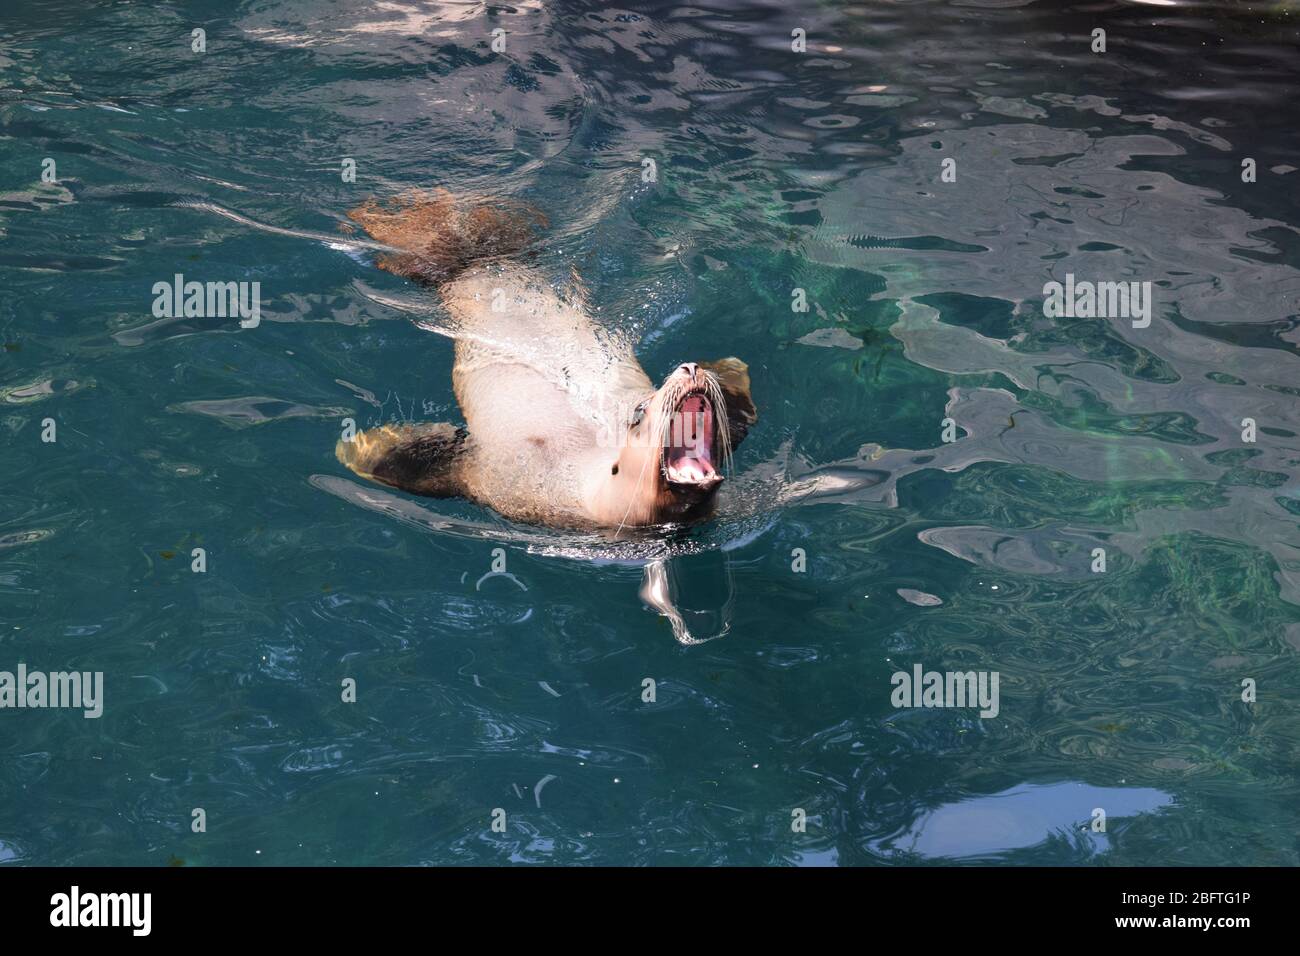 Sea Lion swimming in water with mouth open Stock Photo